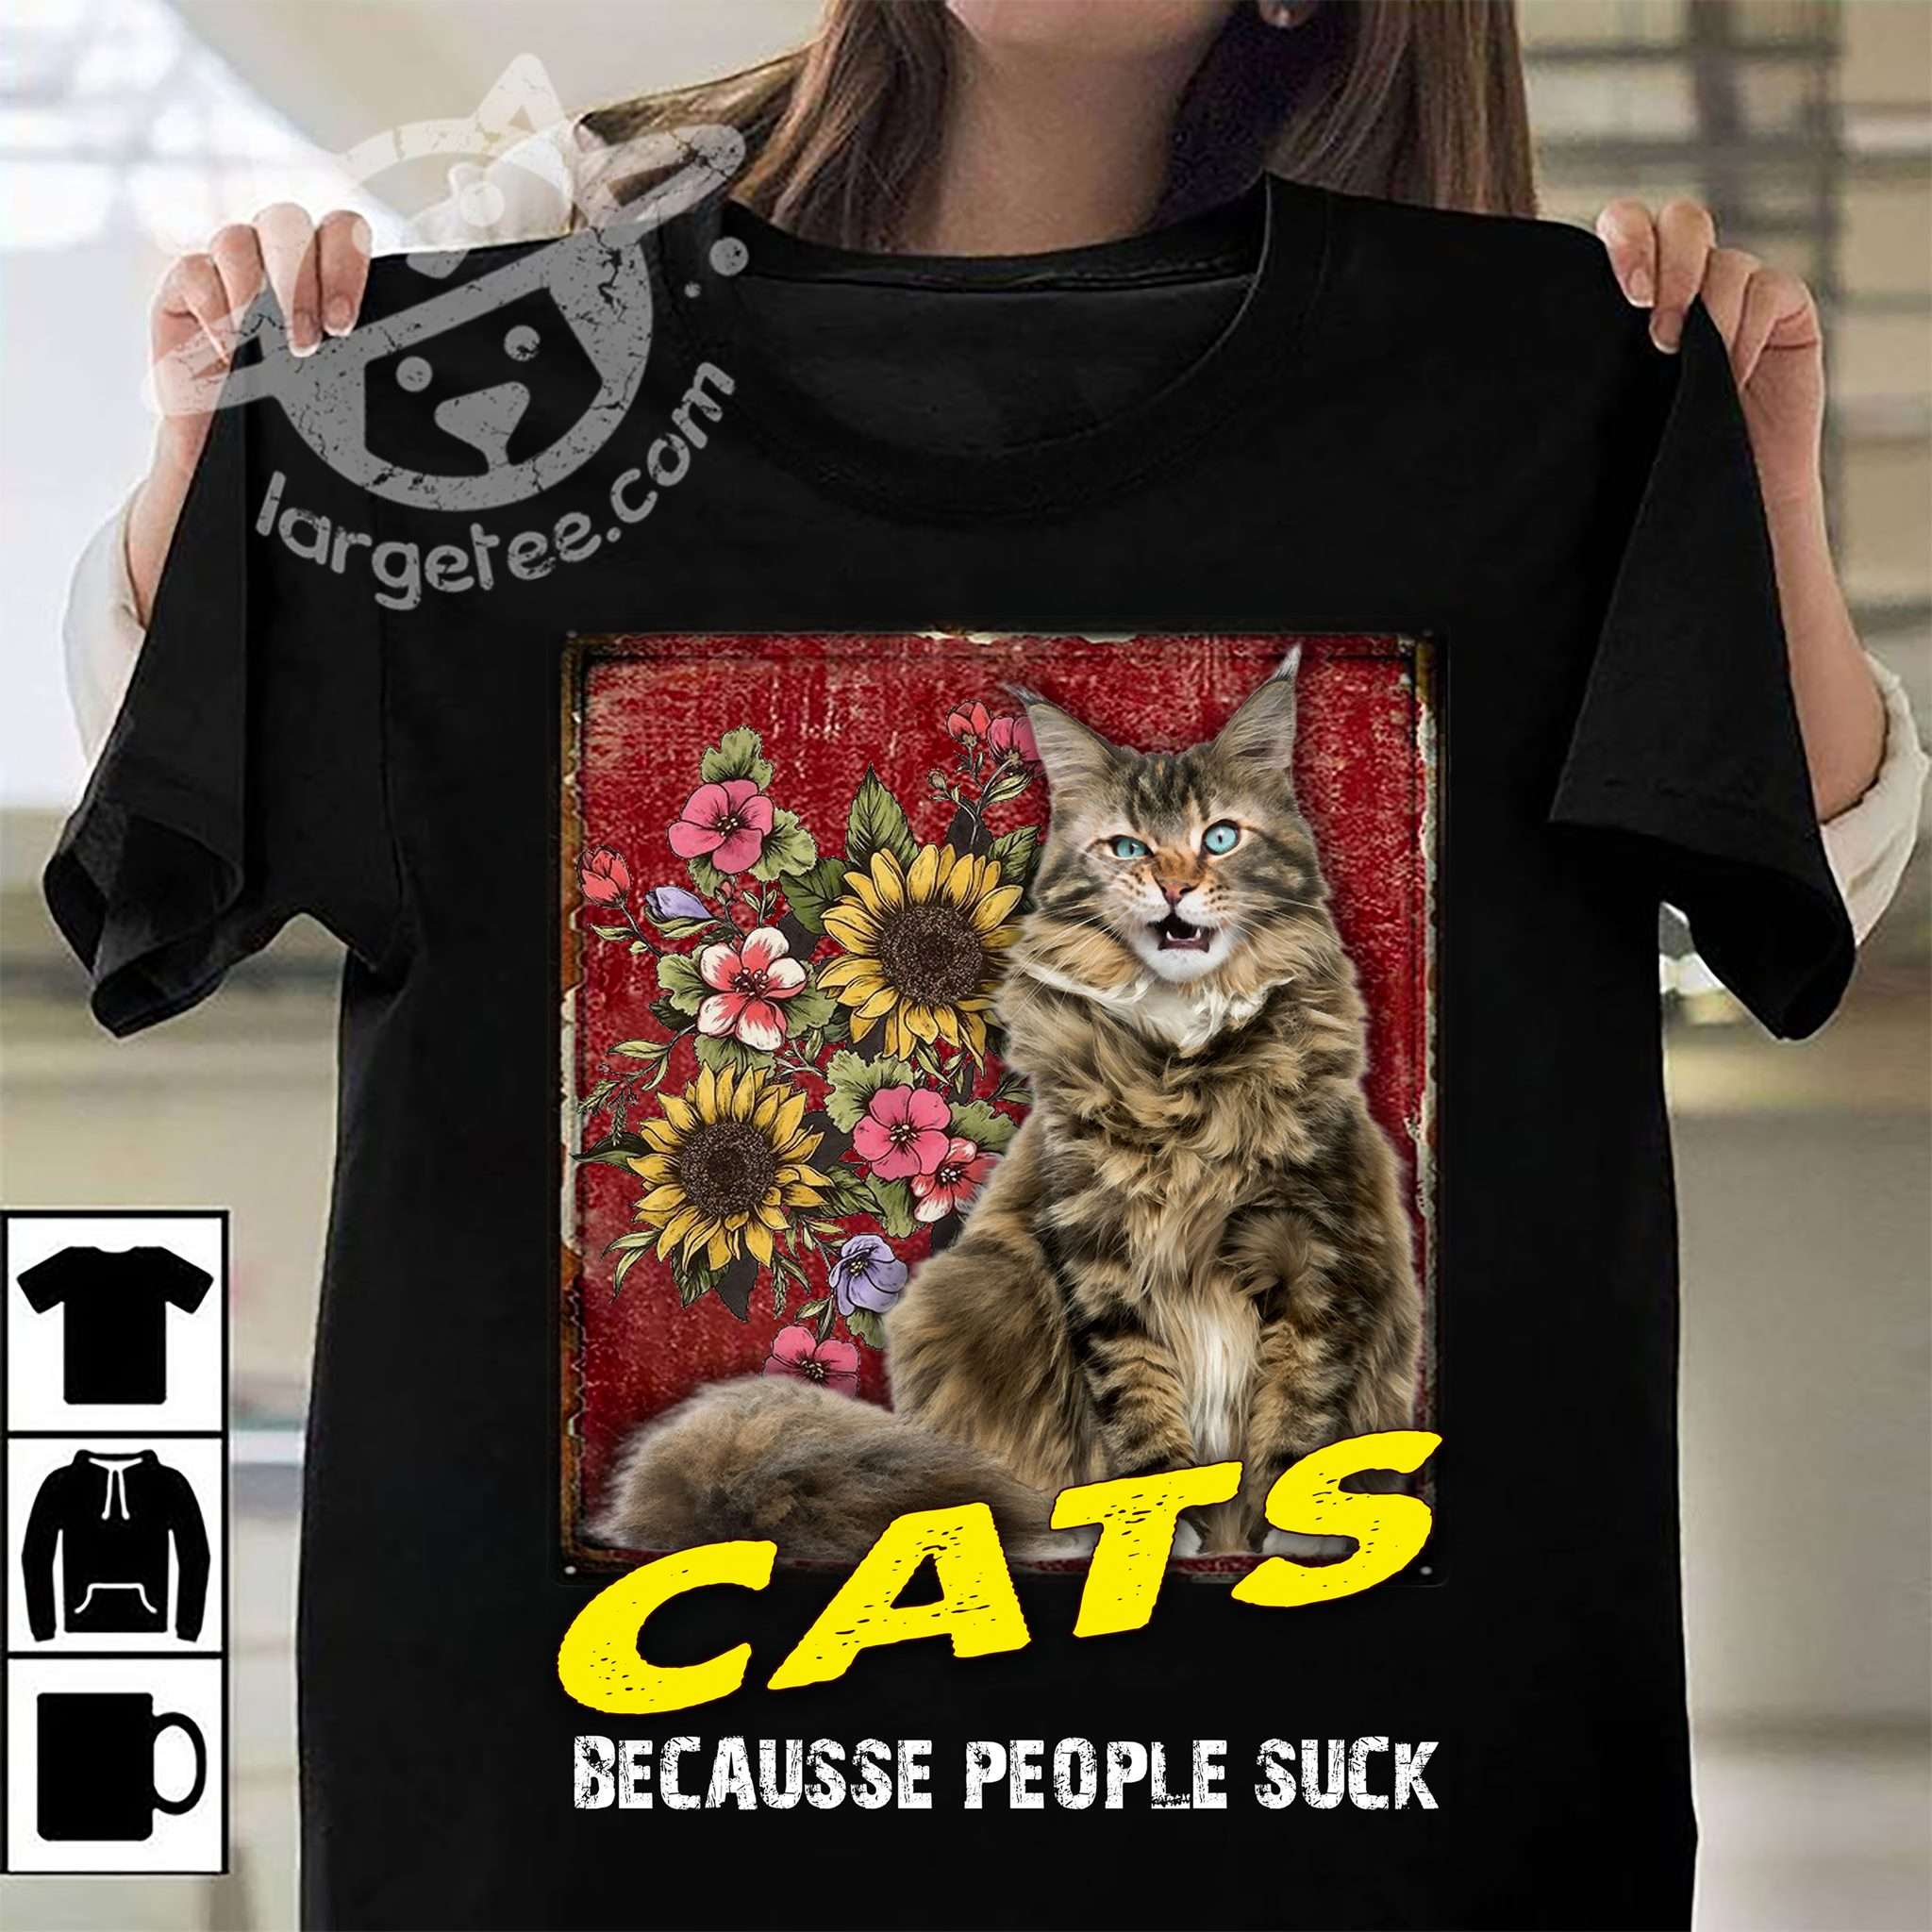 Cats because people sucks - Gift for cat lover, Brown tabby cats